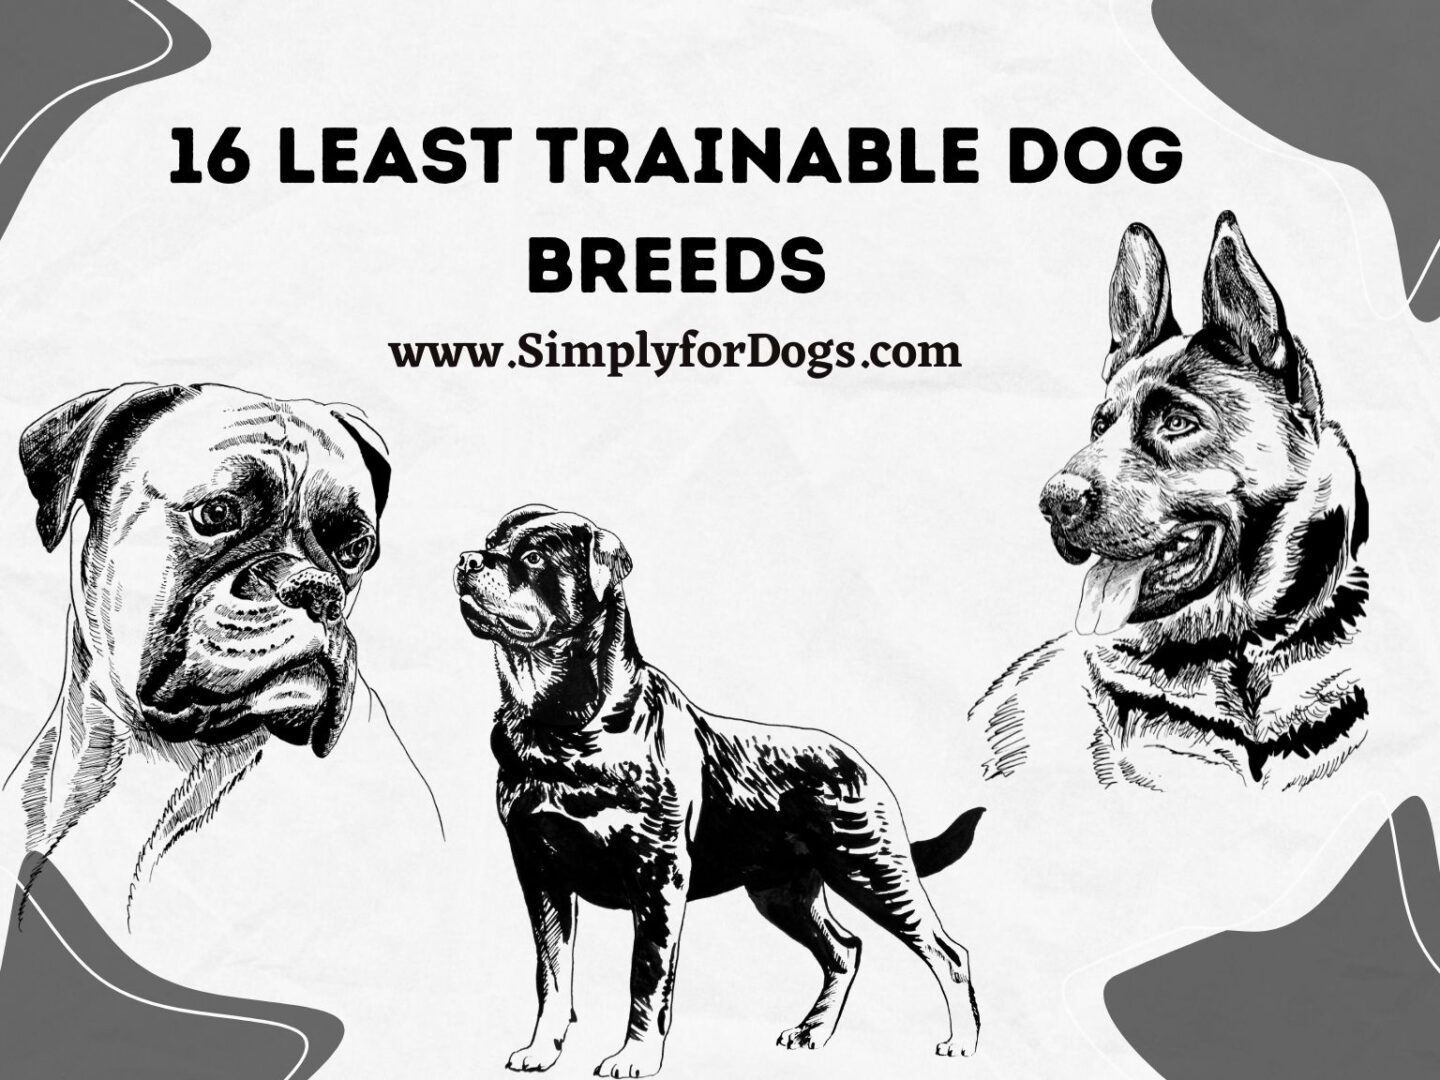 what is the least trainable dog breed